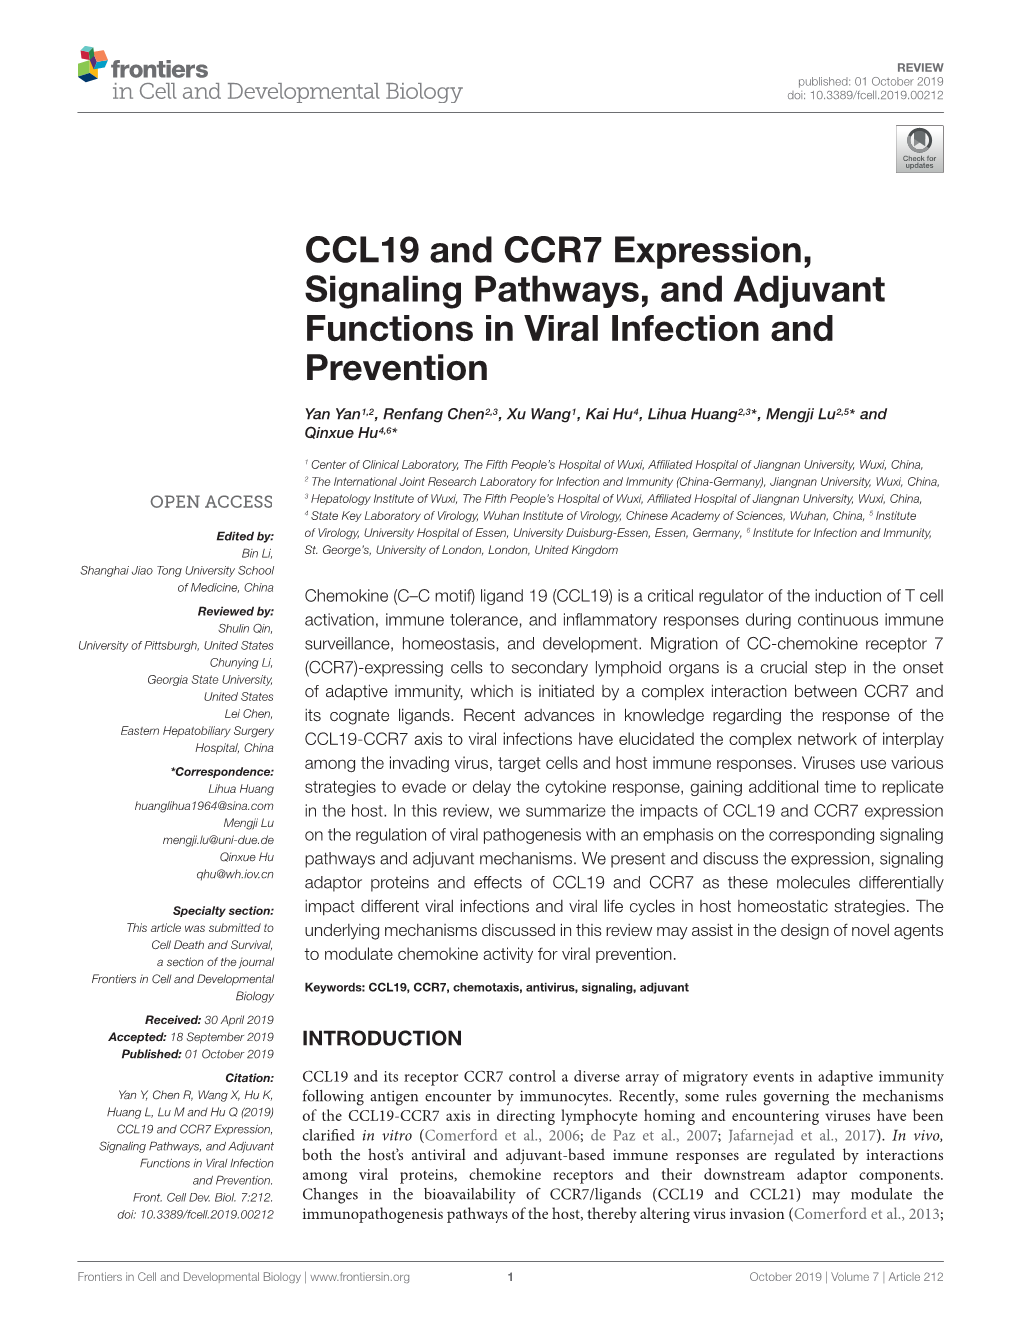 CCL19 and CCR7 Expression, Signaling Pathways, and Adjuvant Functions in Viral Infection and Prevention